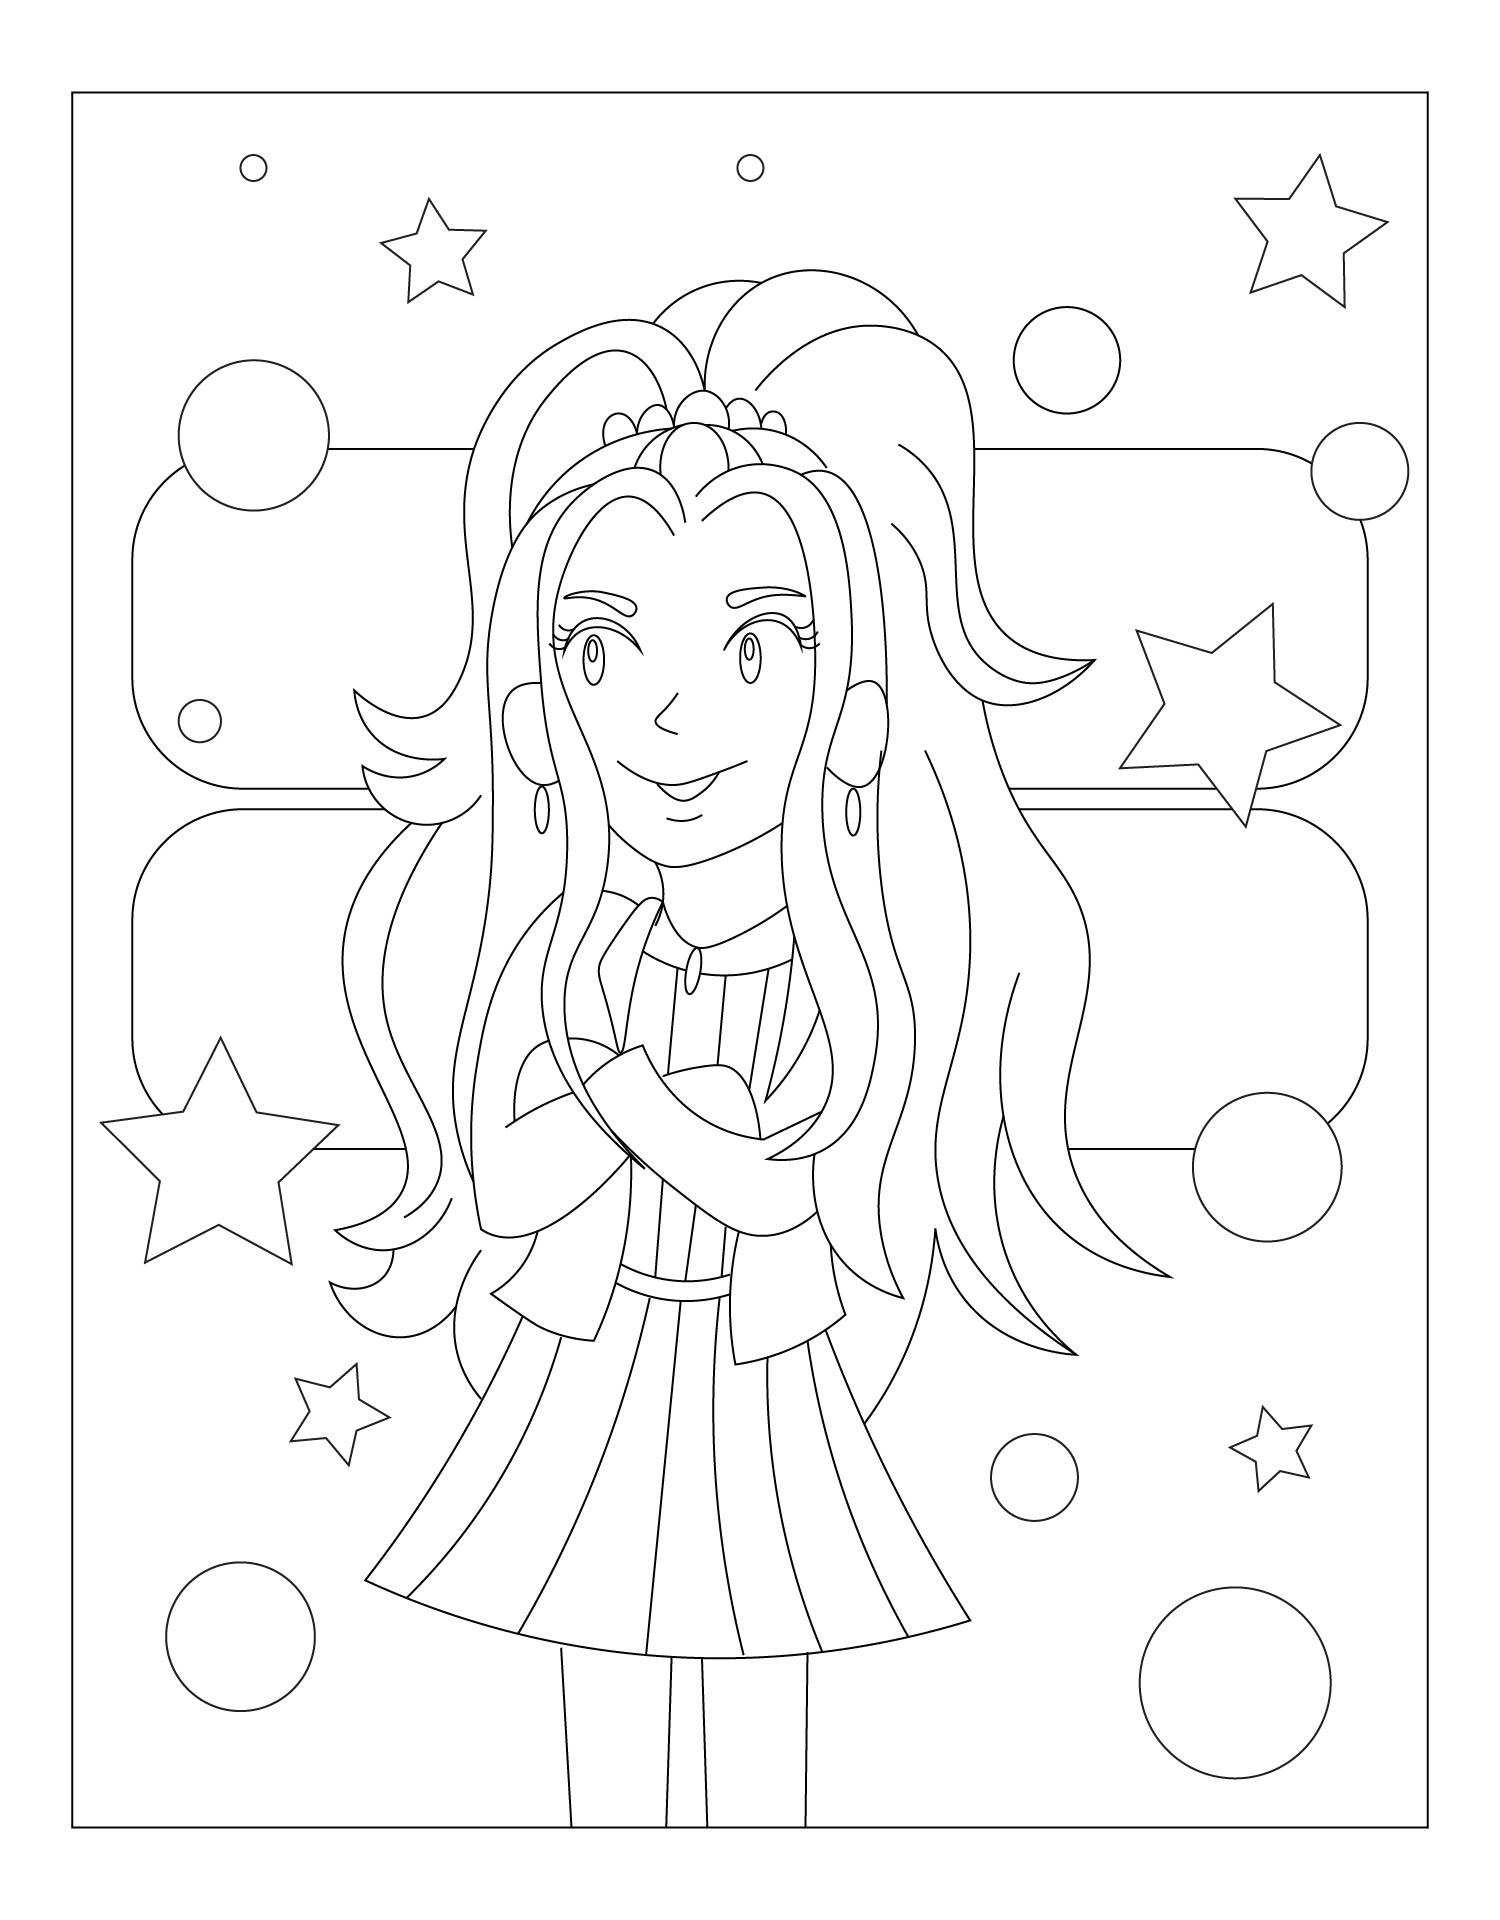 Dork Diary Coloring Pages